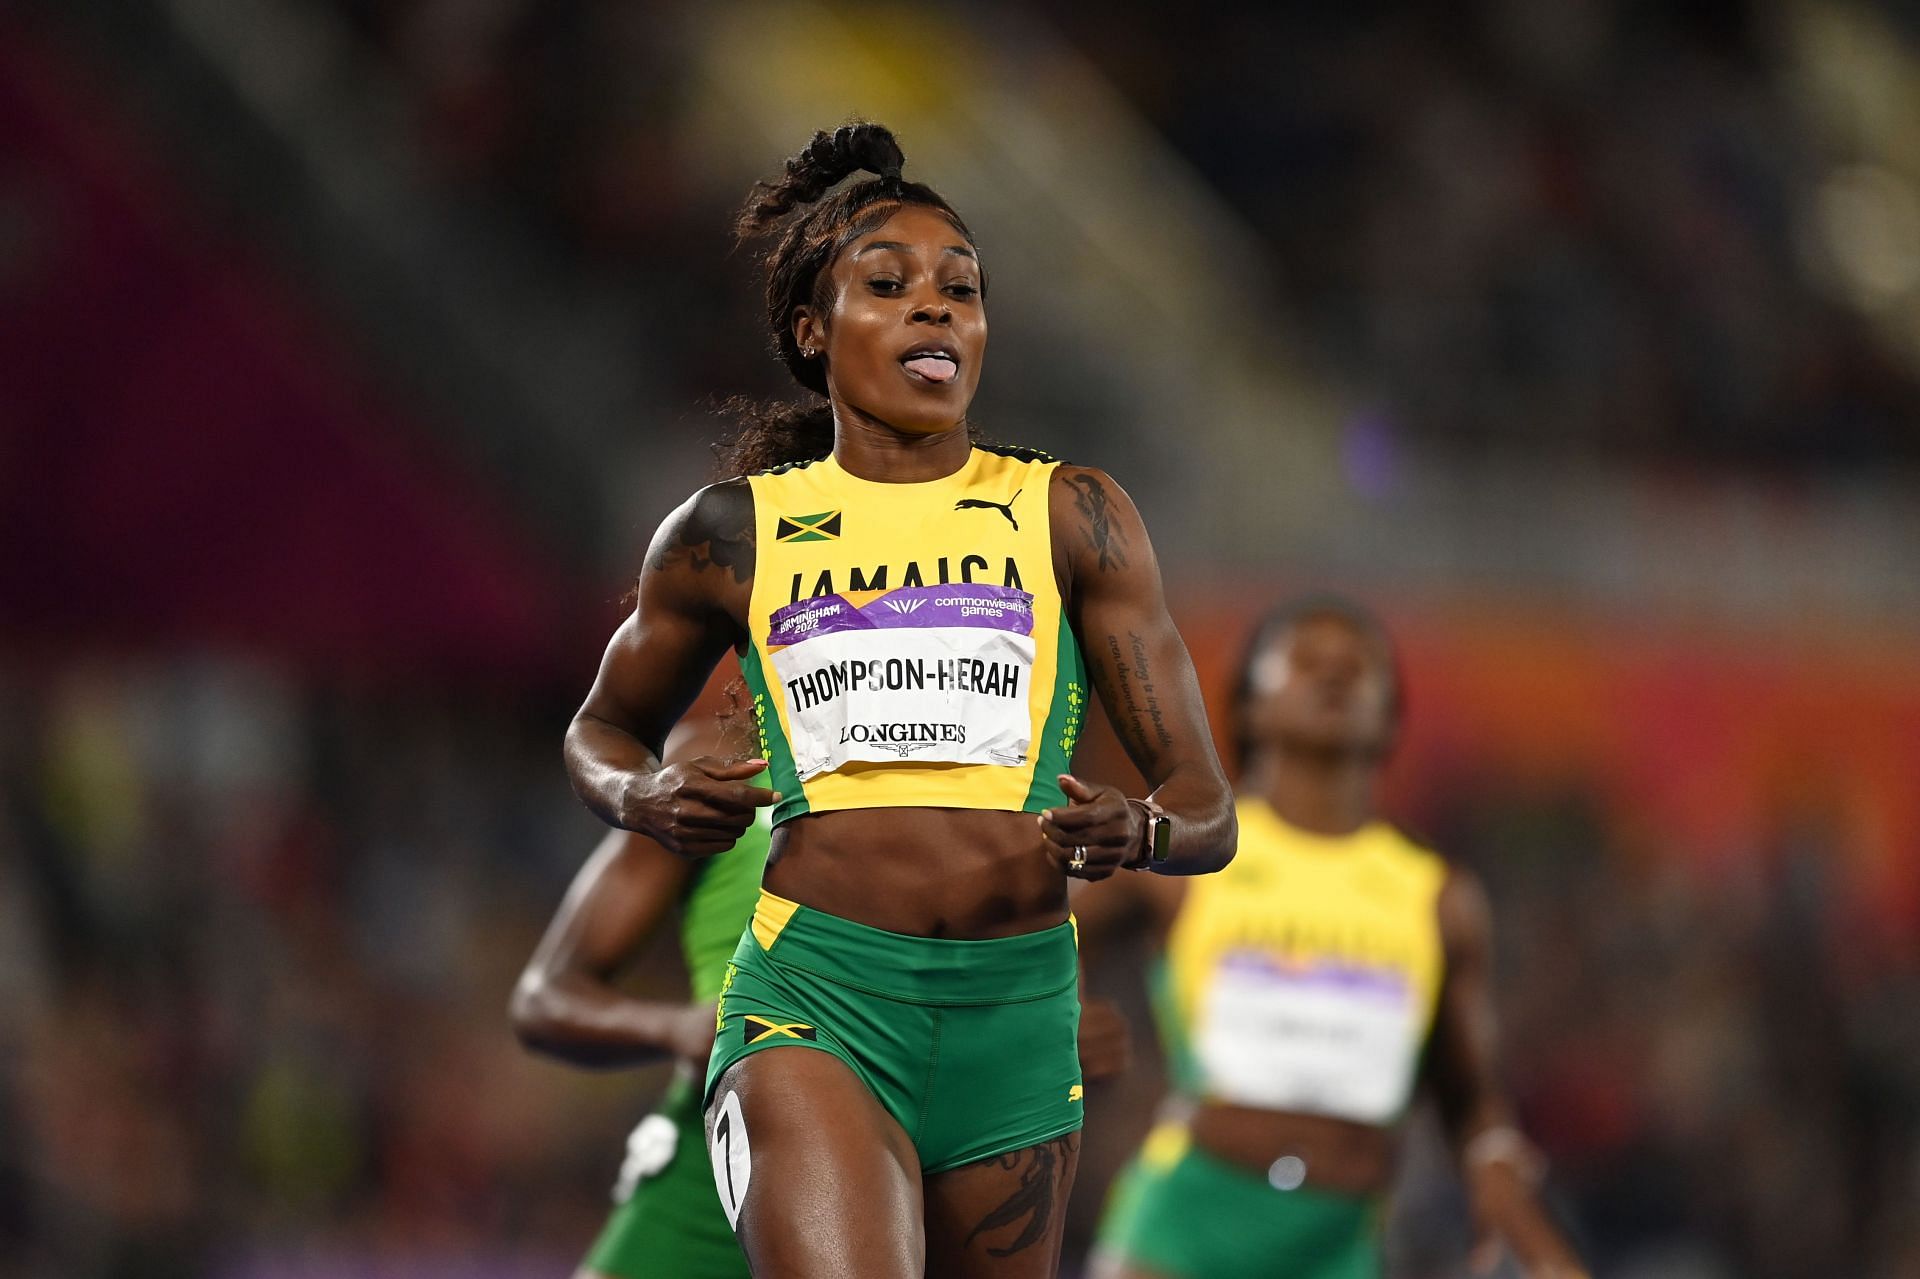 Elaine Thompson-Herah of Team Jamaica reacts after winning the gold medal in the Women&#039;s 200m Final at the 2022 Commonwealth Games in Birmingham, England